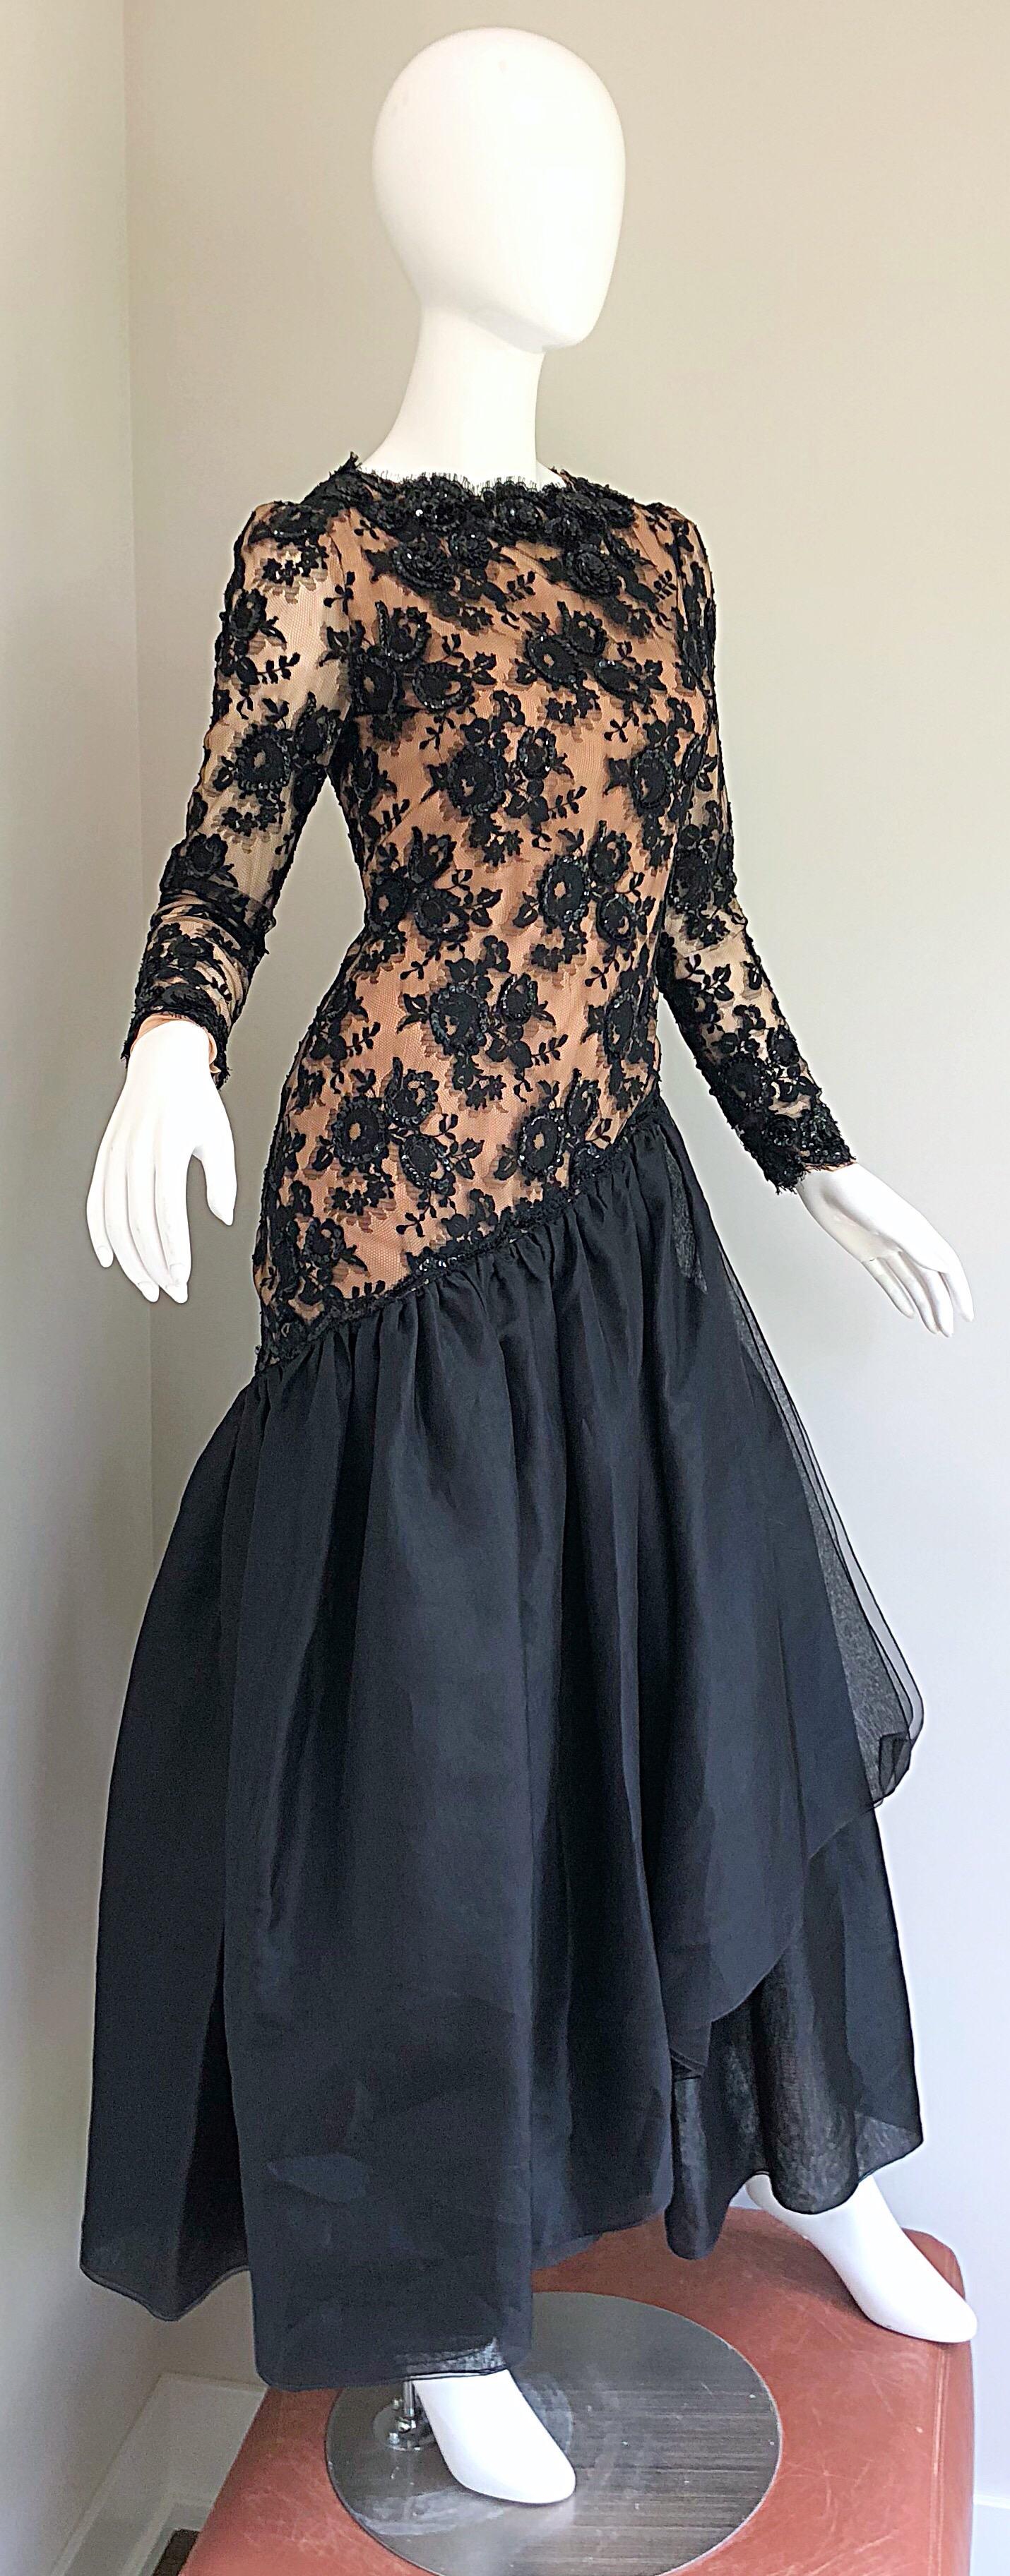 Women's Vintage Bill Blass Black Nude 90s Size 6 / 8 Sequined Chiffon Evening Gown Dress For Sale